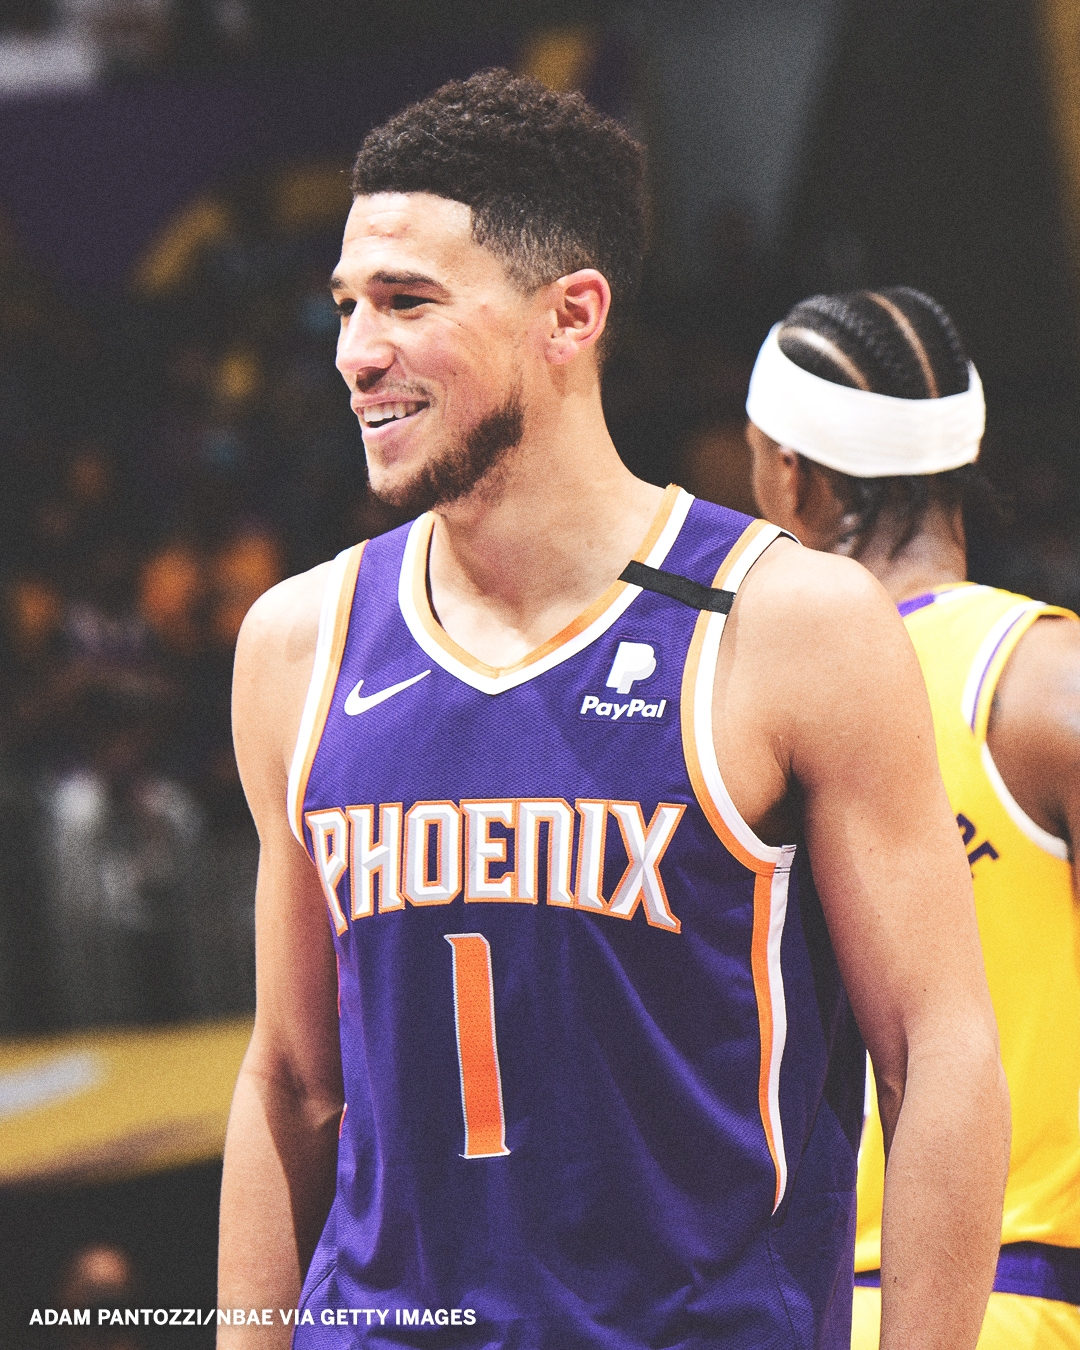 ESPN - 47 points and sent the defending champs home. Devin Booker